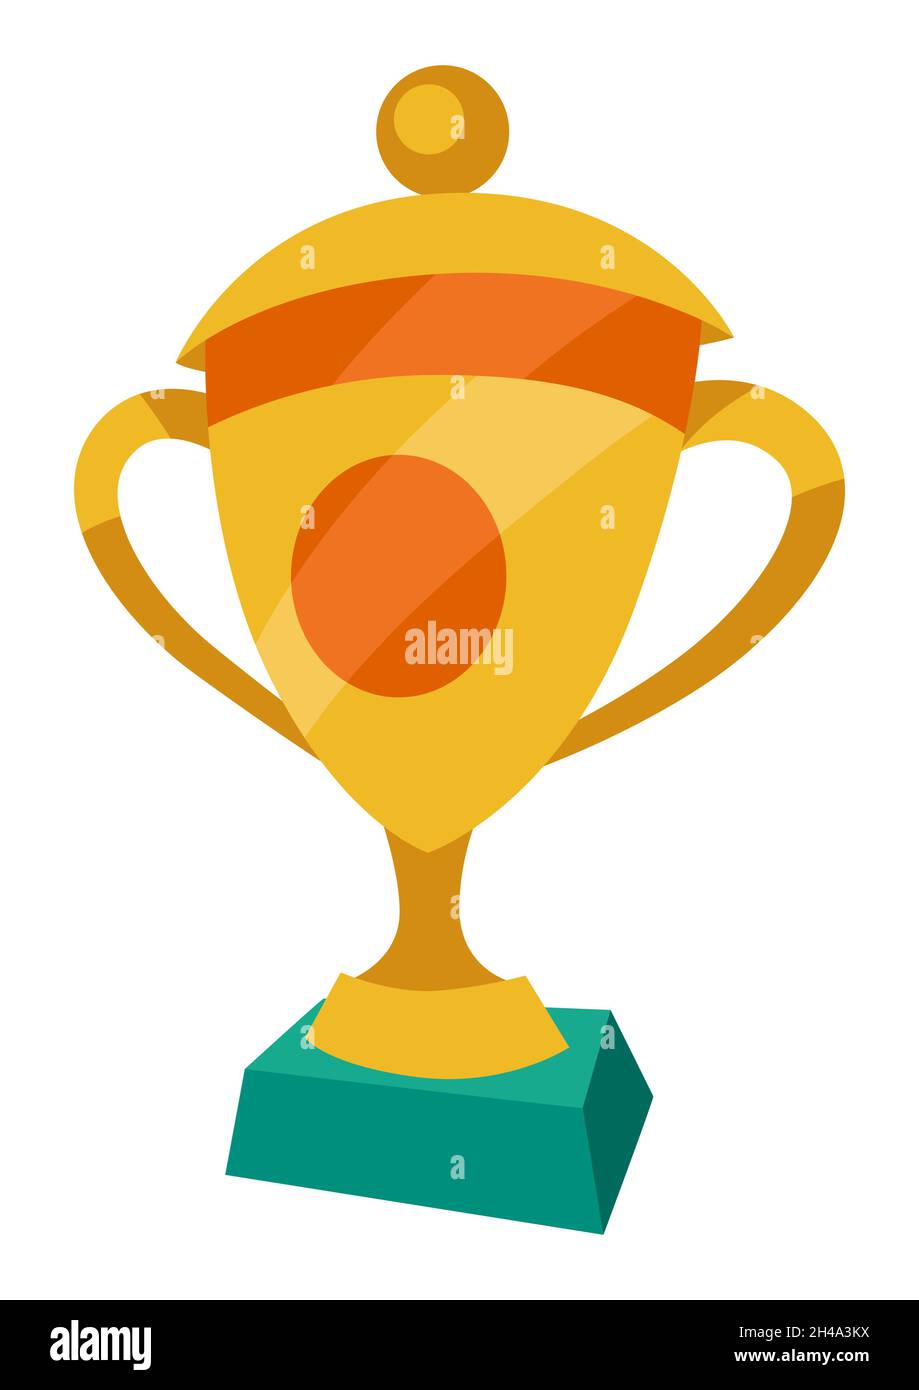 Icon of prise cup. Sport equipment illustration. For training and competition design. Stock Vector